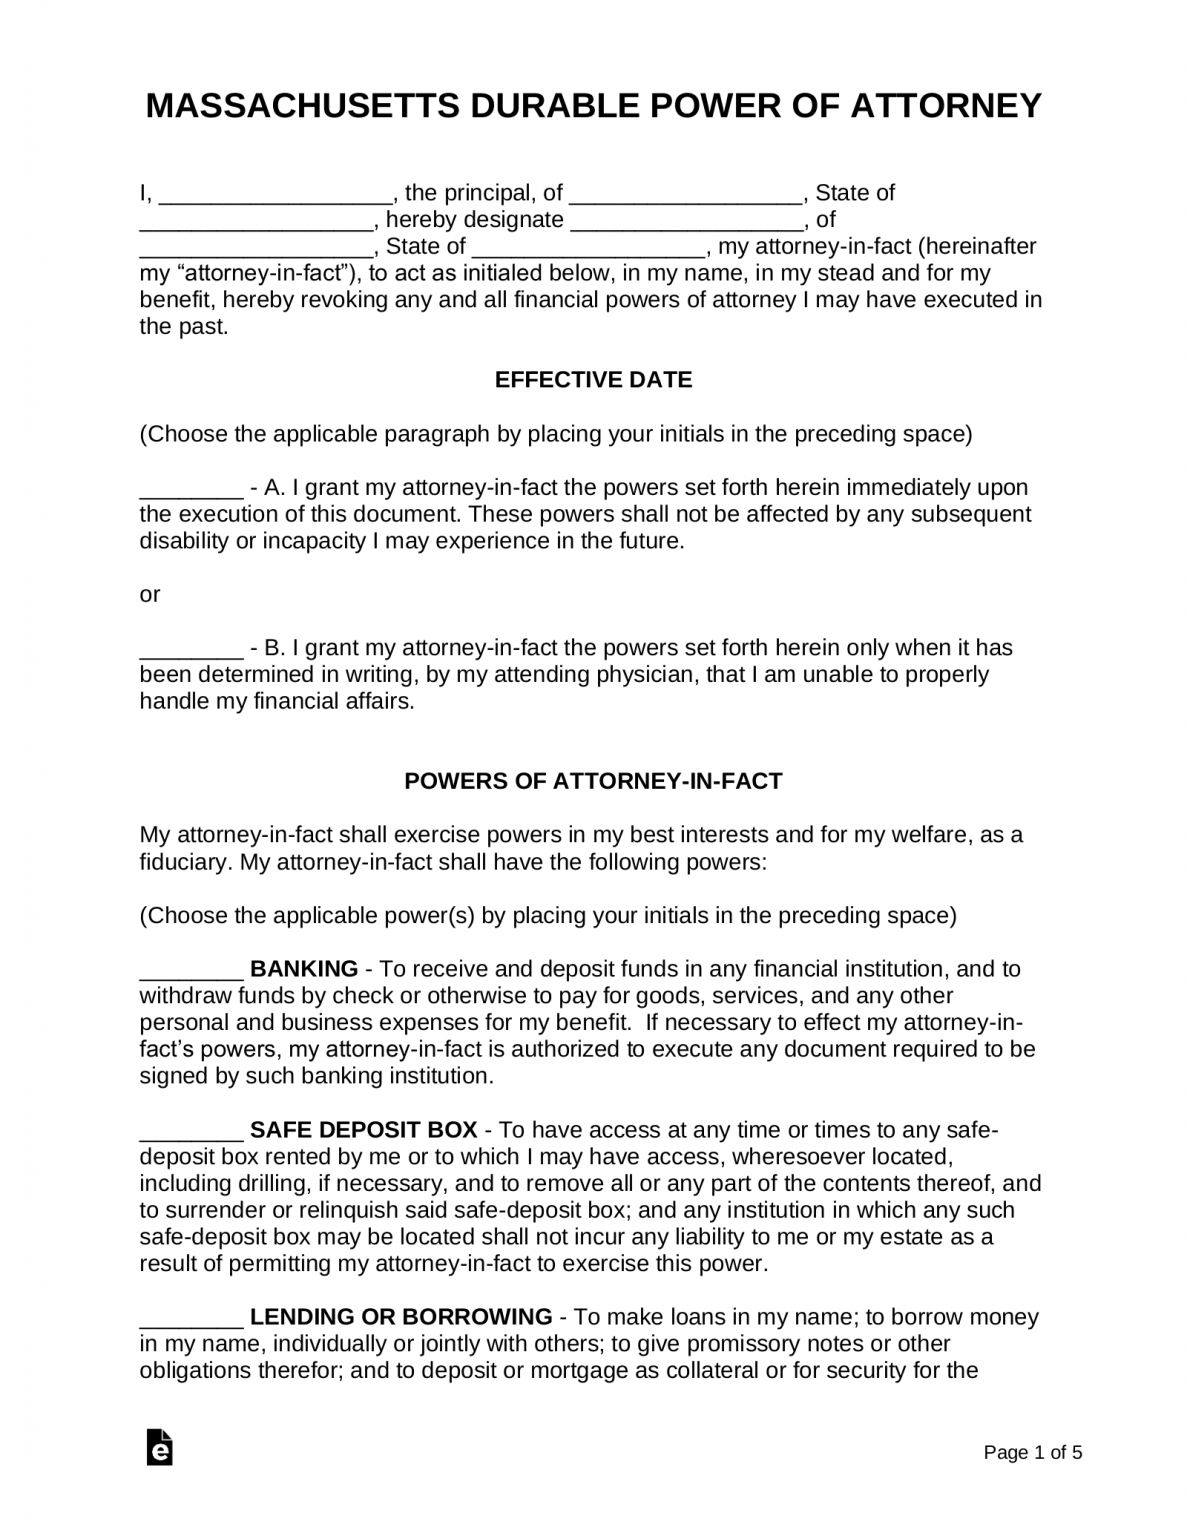 free-massachusetts-power-of-attorney-forms-9-types-pdf-word-eforms